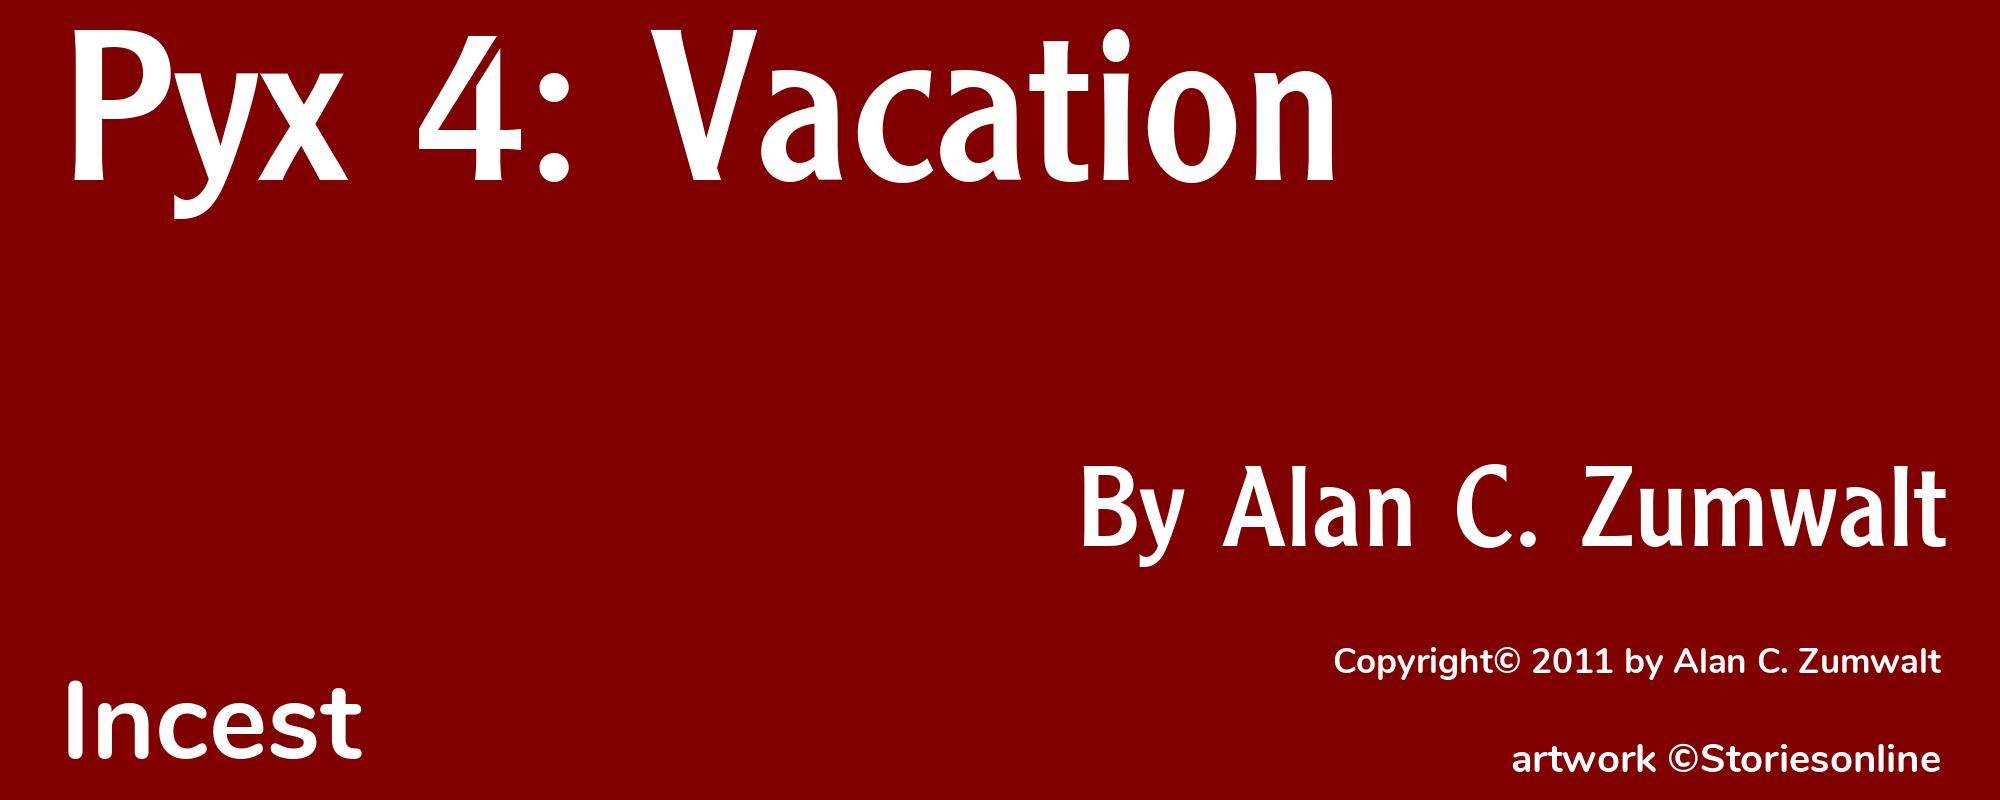 Pyx 4: Vacation - Cover